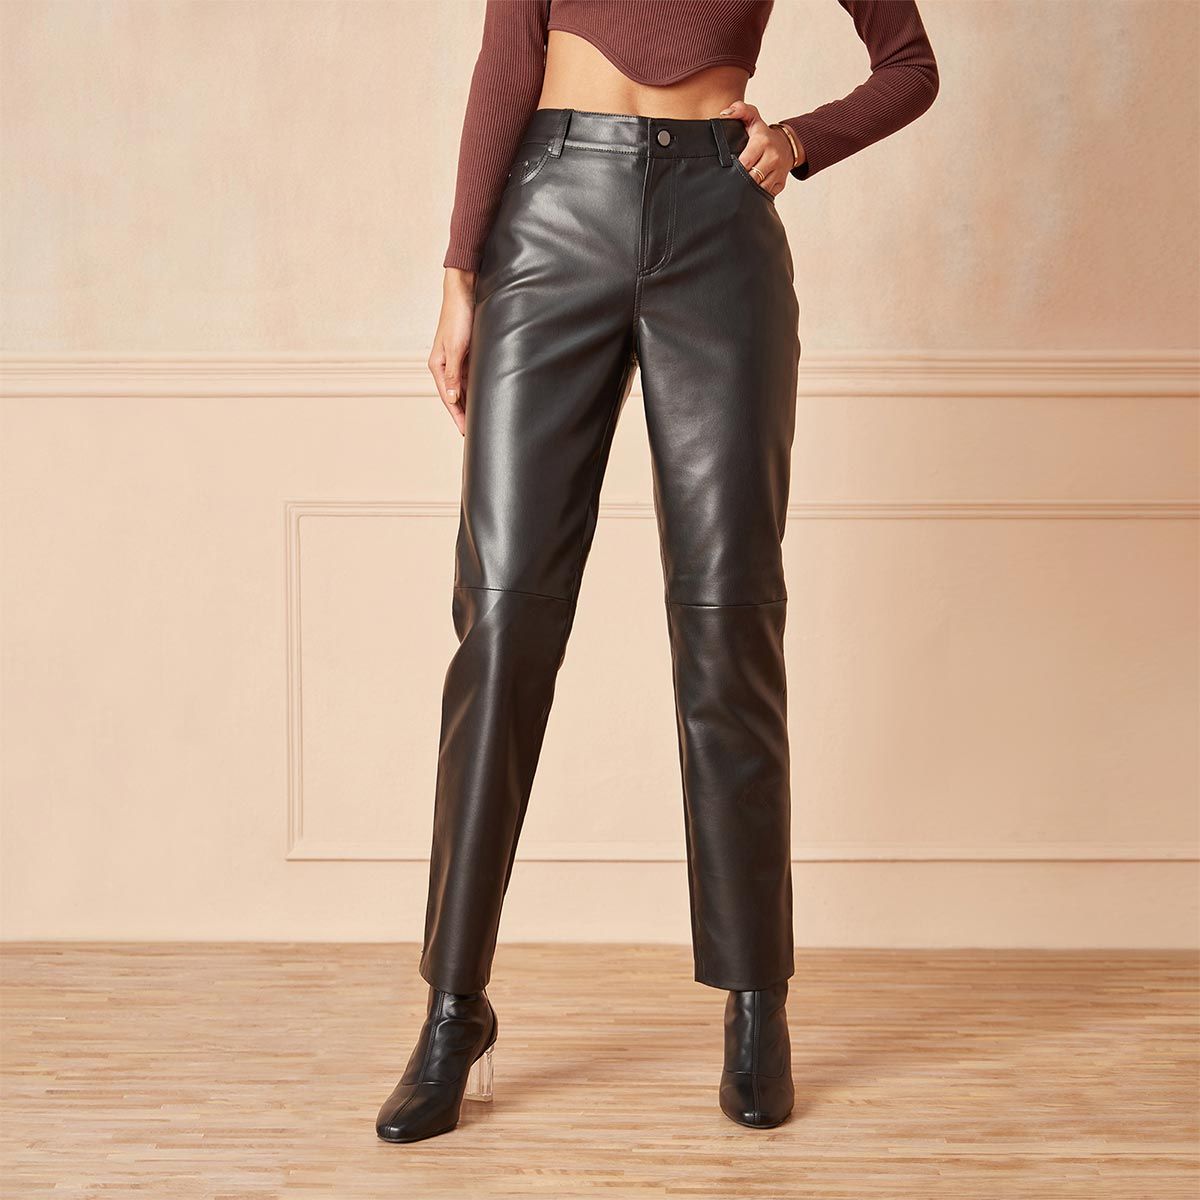 Polyurethane High Waist Women PU Leather Pant at Rs 2780/piece in